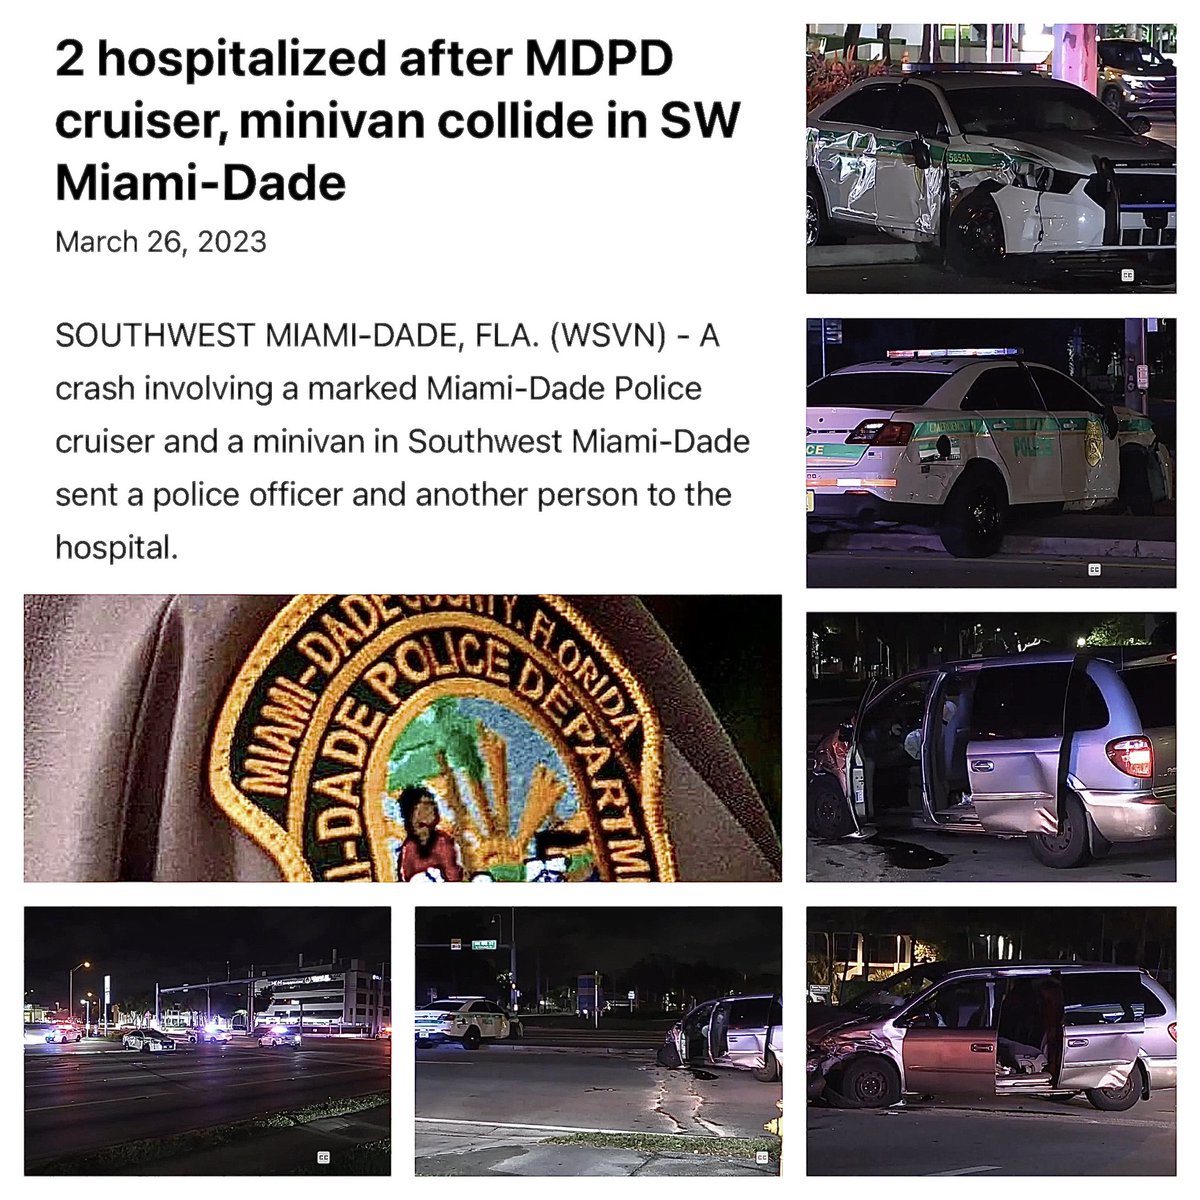 wsvn.com/news/local/mia… #accidentshappen #TrafficPolice #TrafficRules #Vehicular #driversafety #investigations #investigator #MIAMIDADEPOLICEDEPARTMENT #MIAMIDADEPOLICE #MDPD #ALEXFORNET #crashed #crashes #crashing #emergencies #obstacleavoidance #avoidance #staysafeoutthere #PD